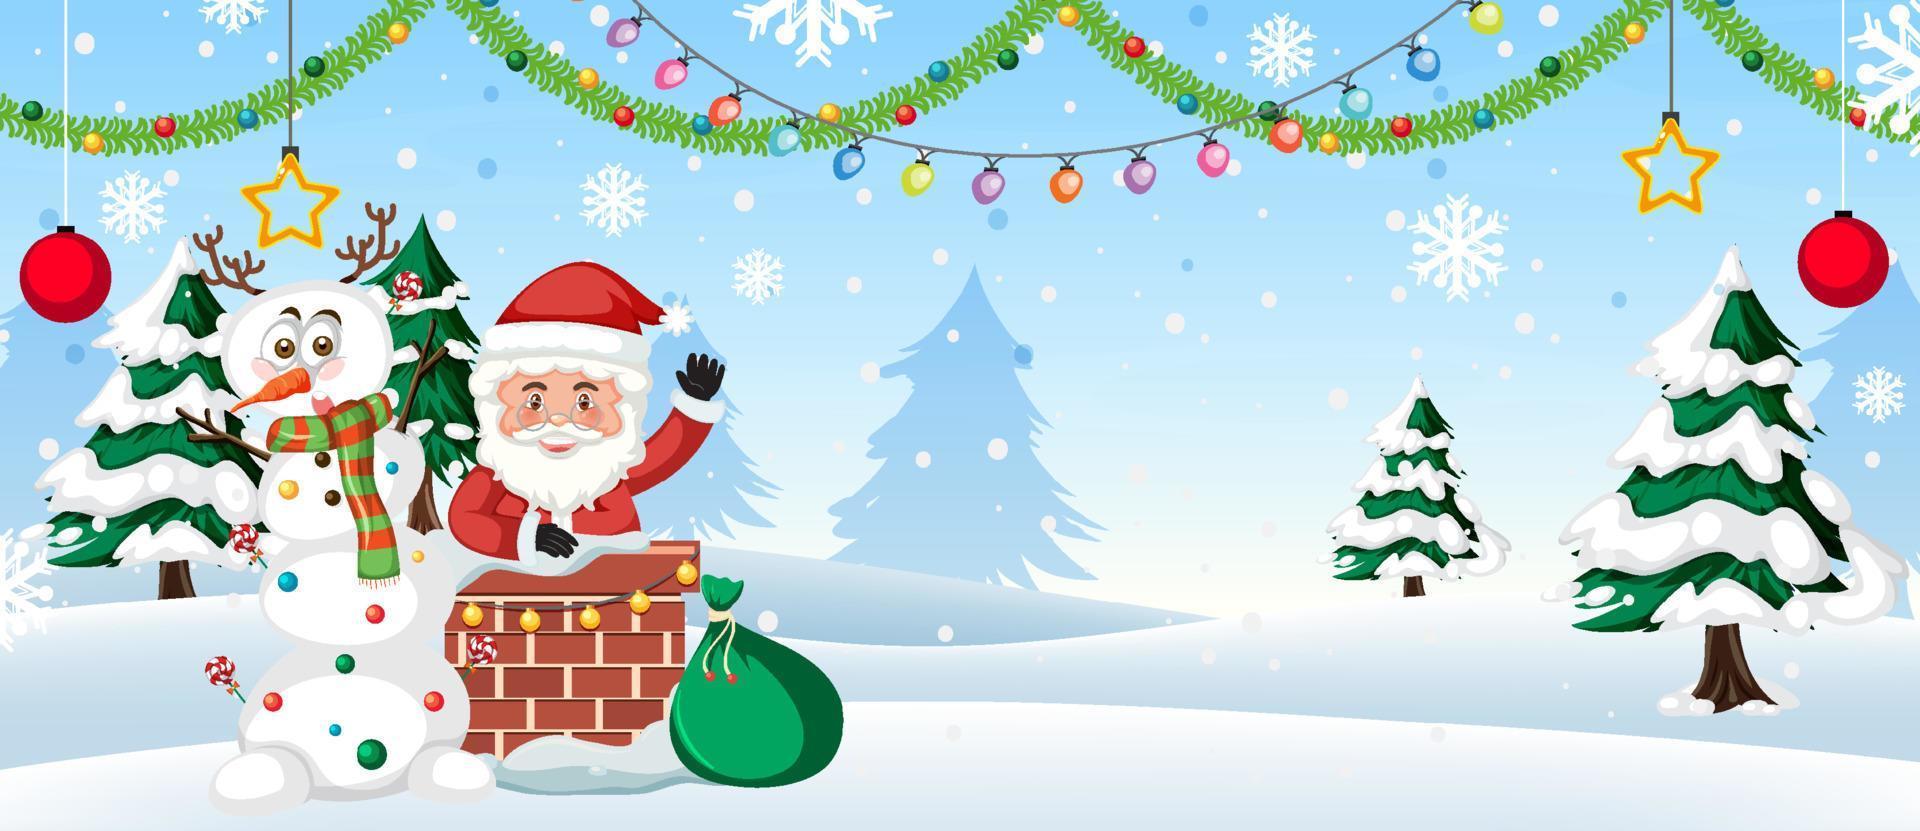 Christmas background with Santa Claus and snowman vector